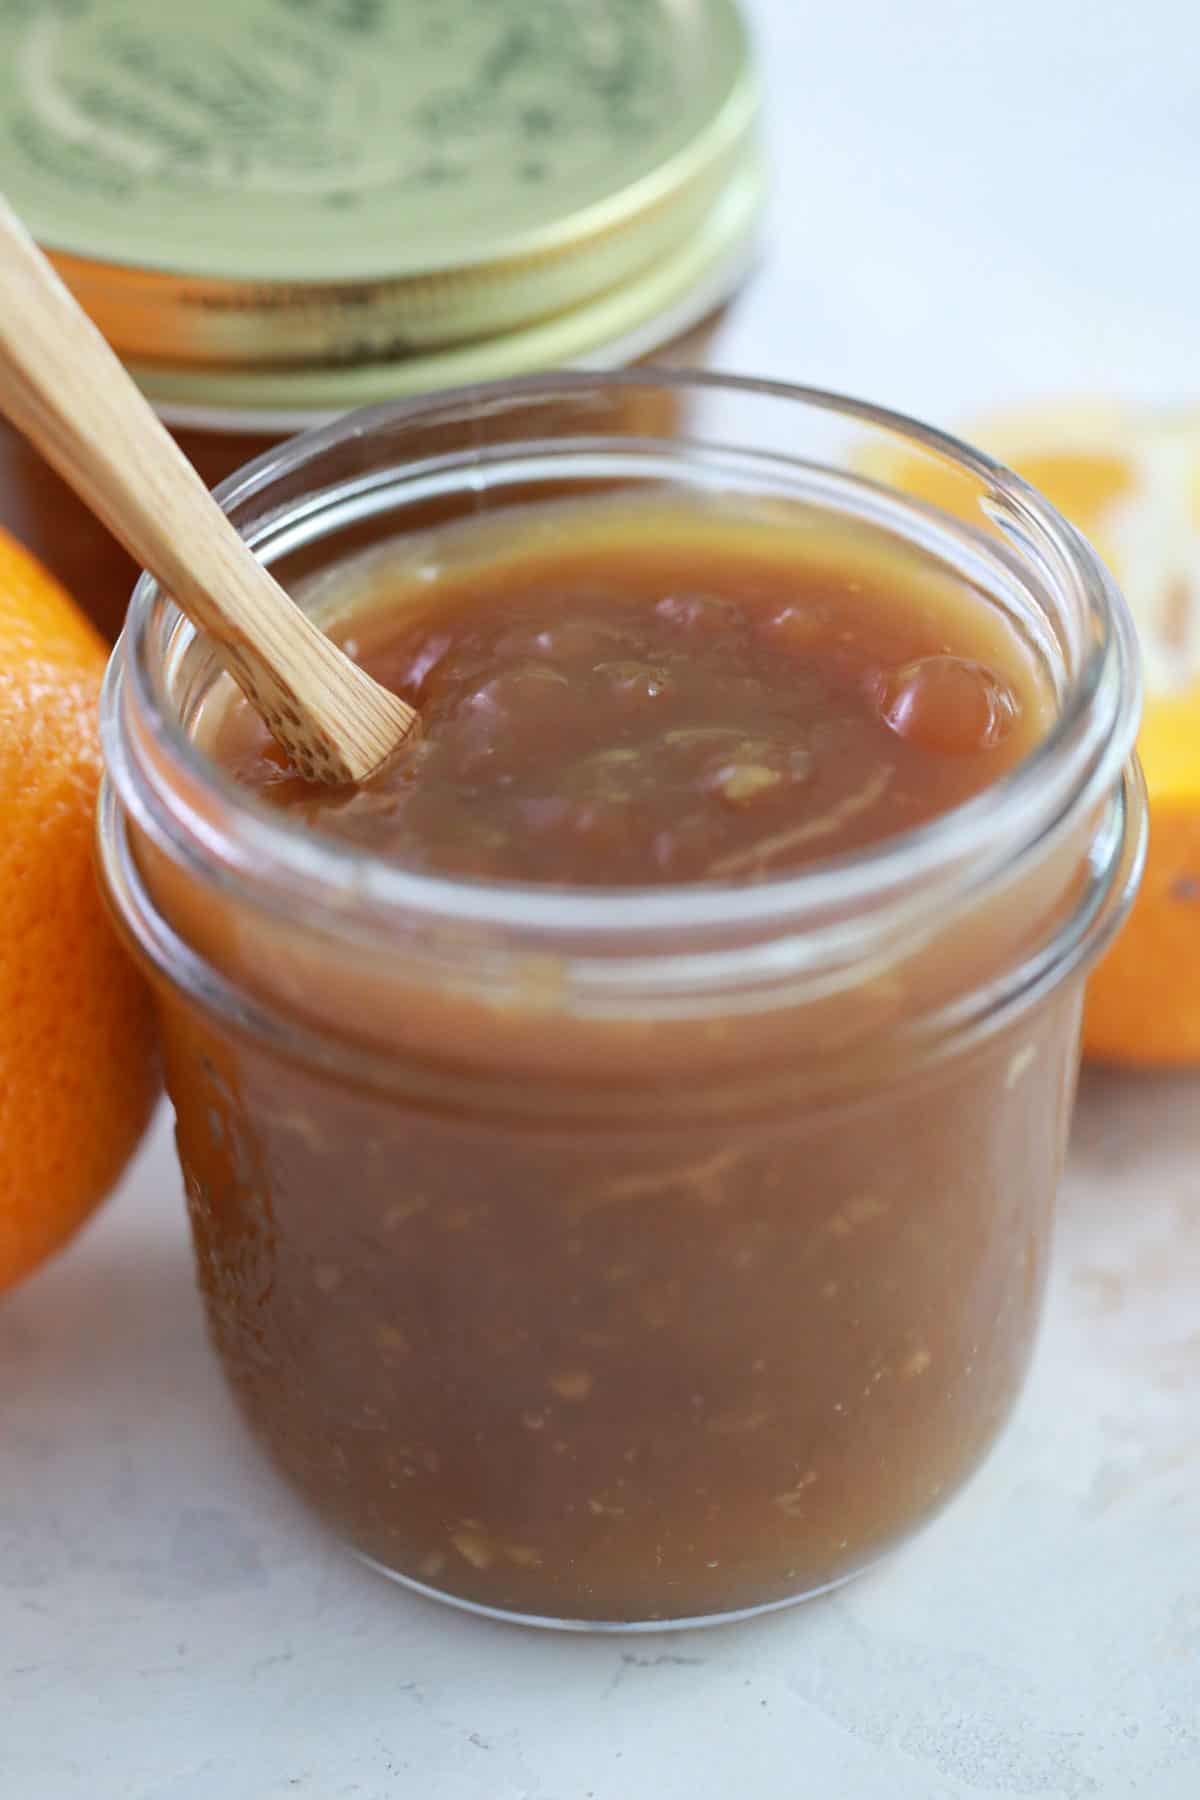 a jar full of orange sauce with a wooden spoon in it